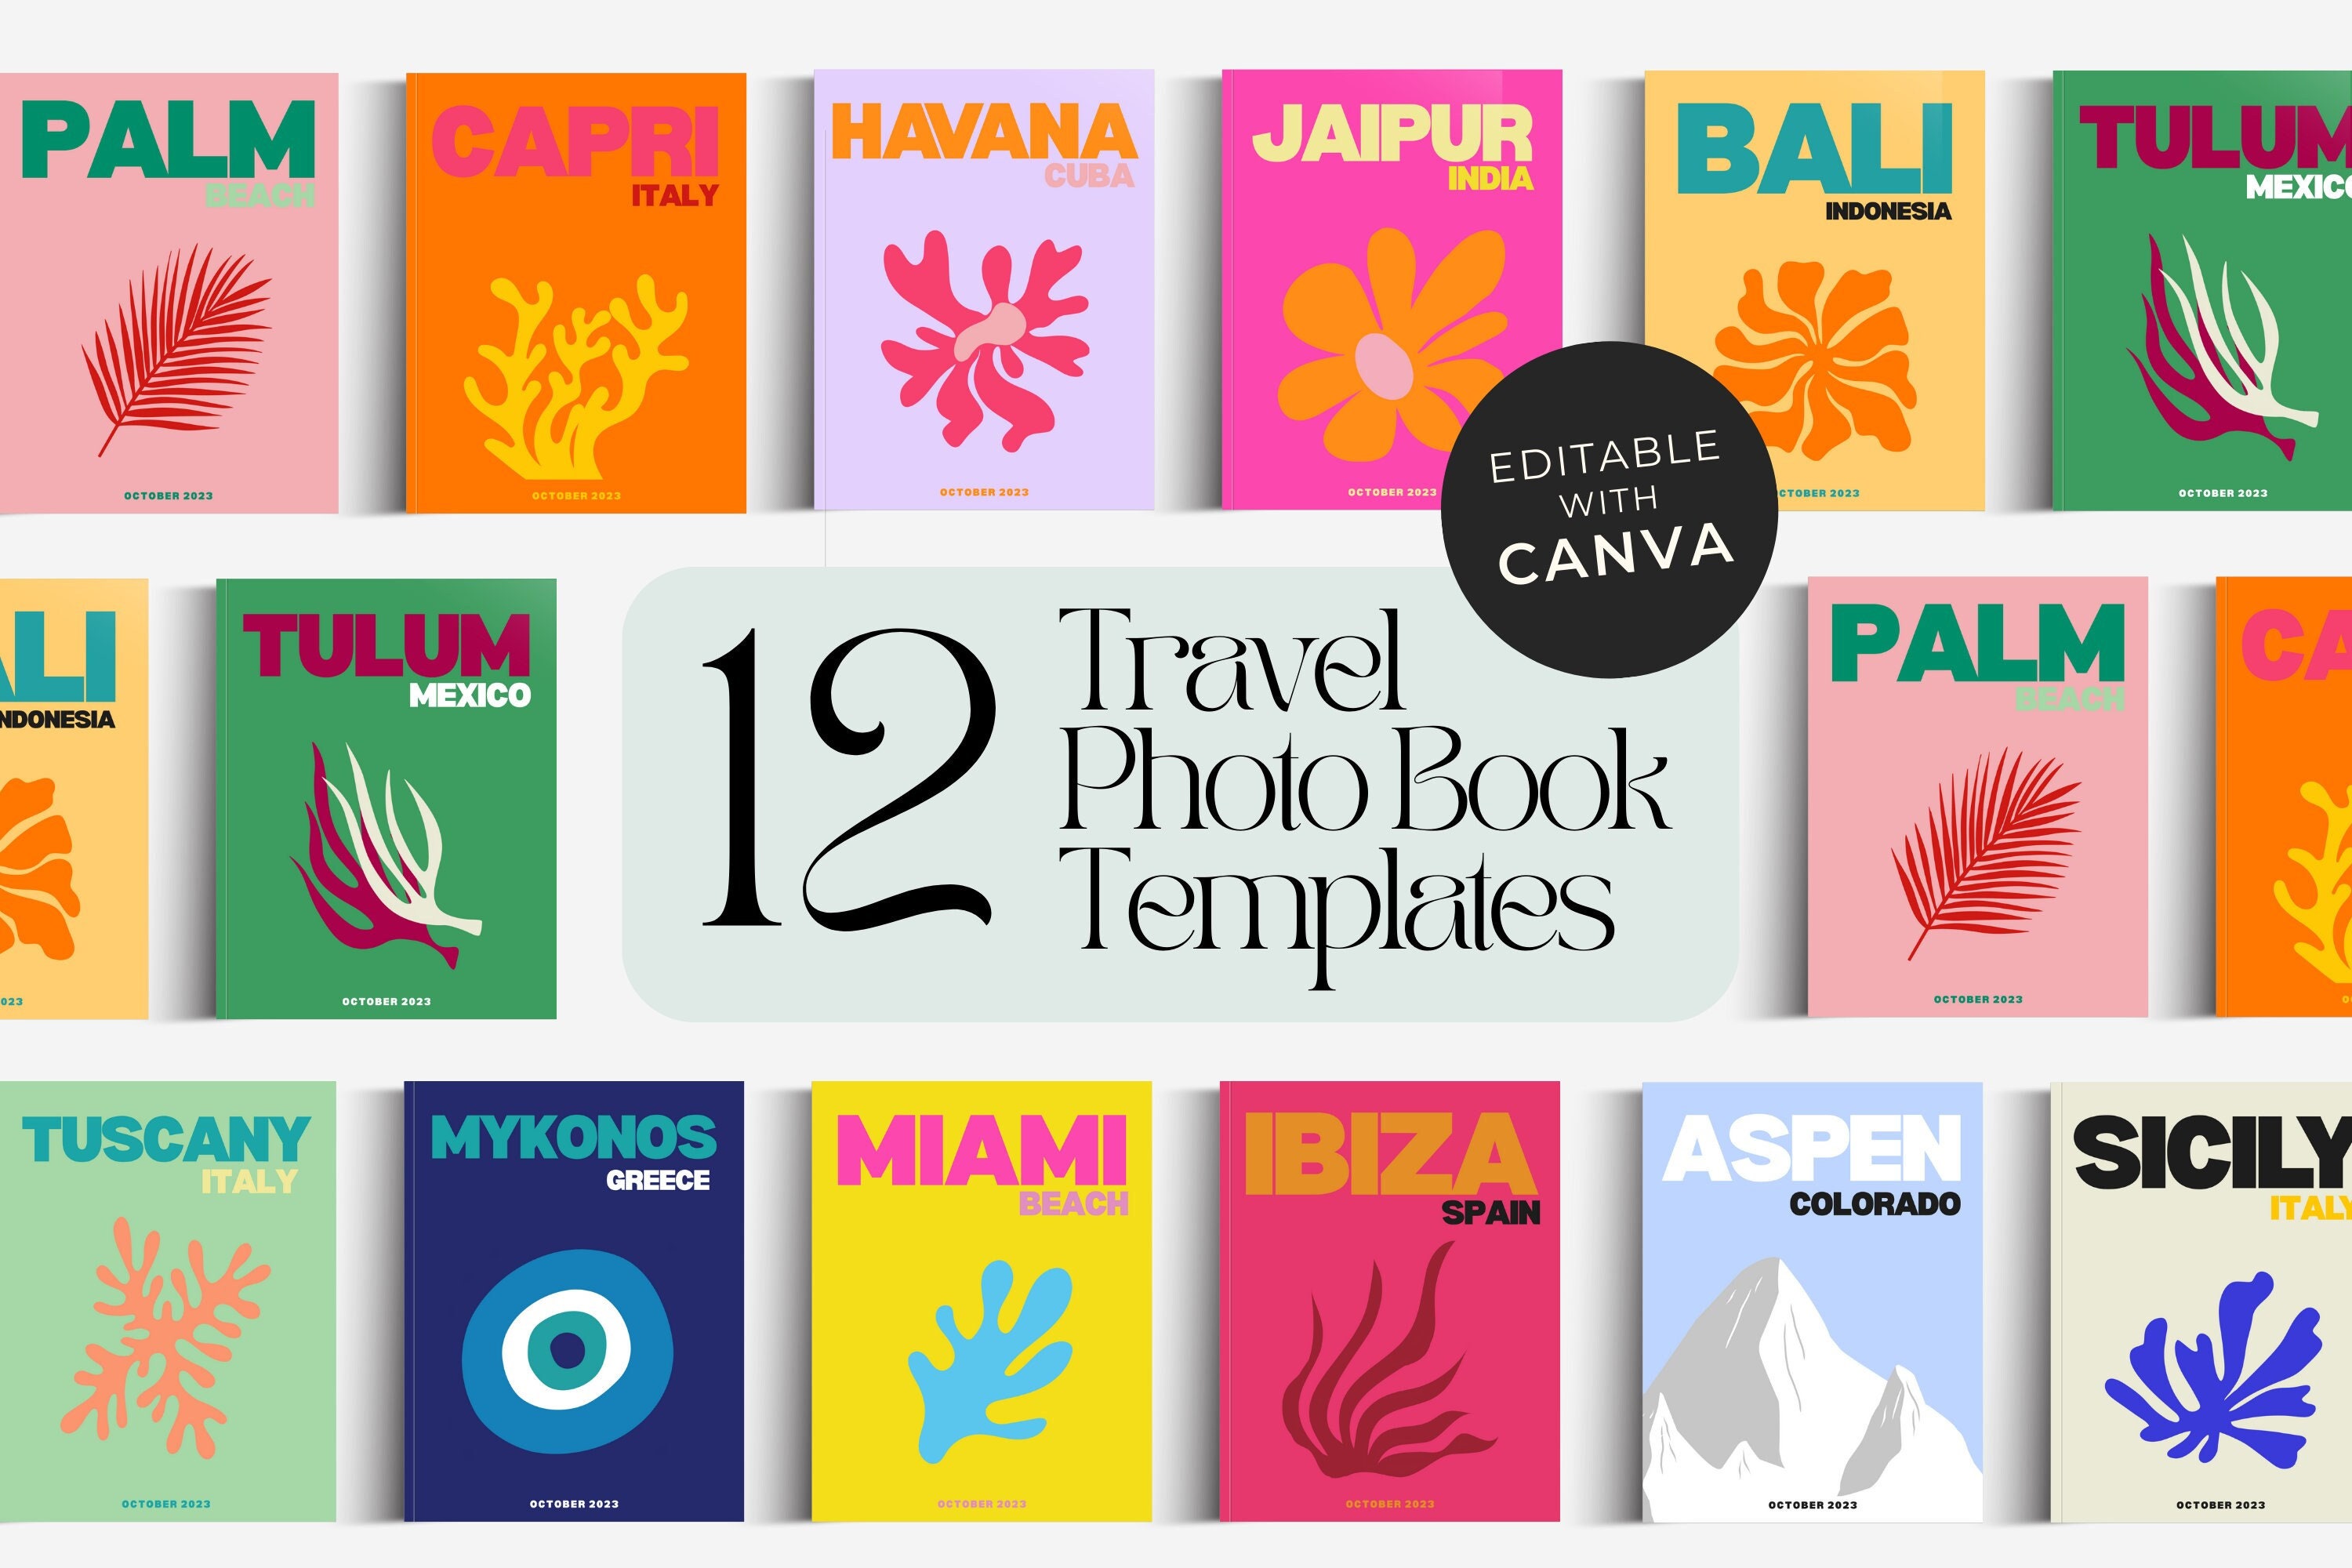 Travel Book Covers - 179+ Best Travel Book Cover Ideas & Inspiration